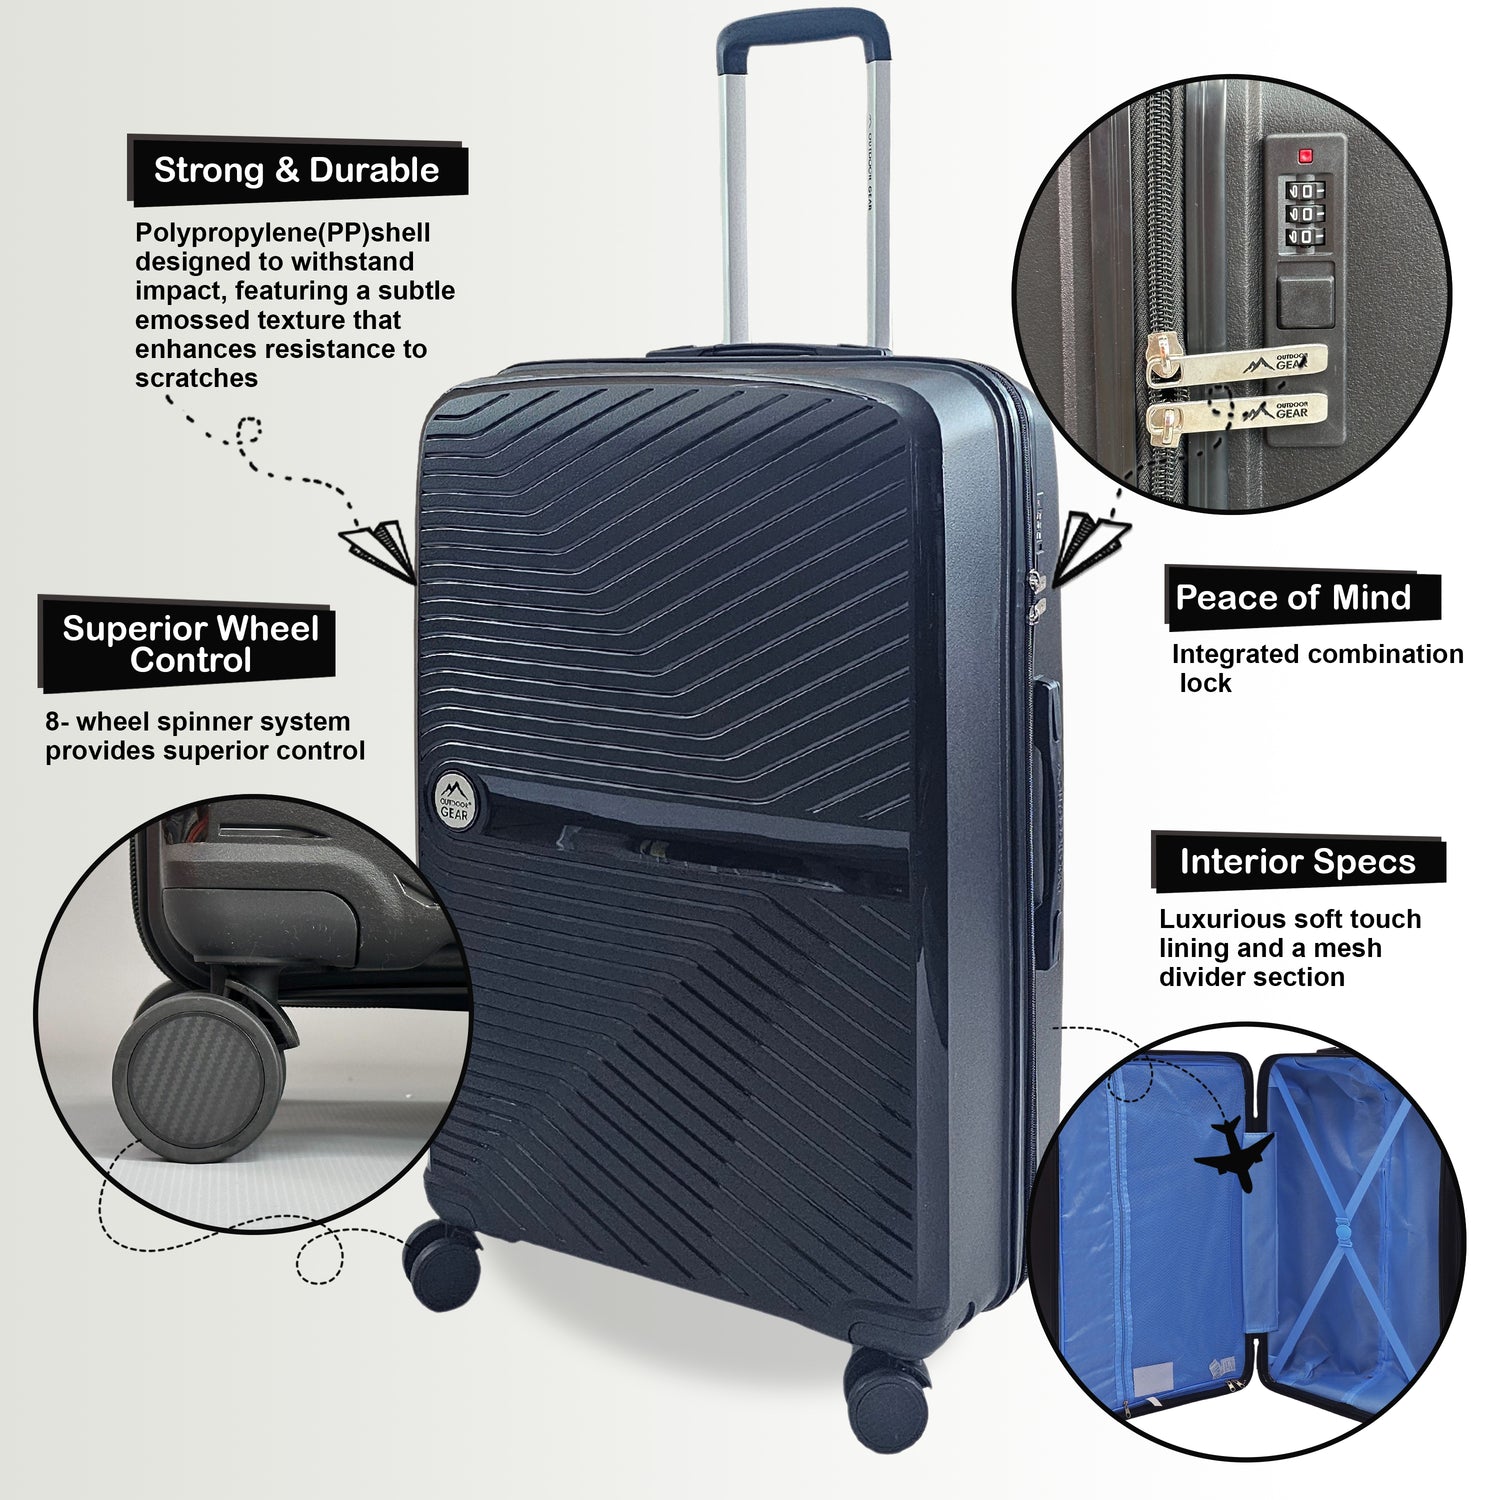 Abbeville Large Hard Shell Suitcase in Black